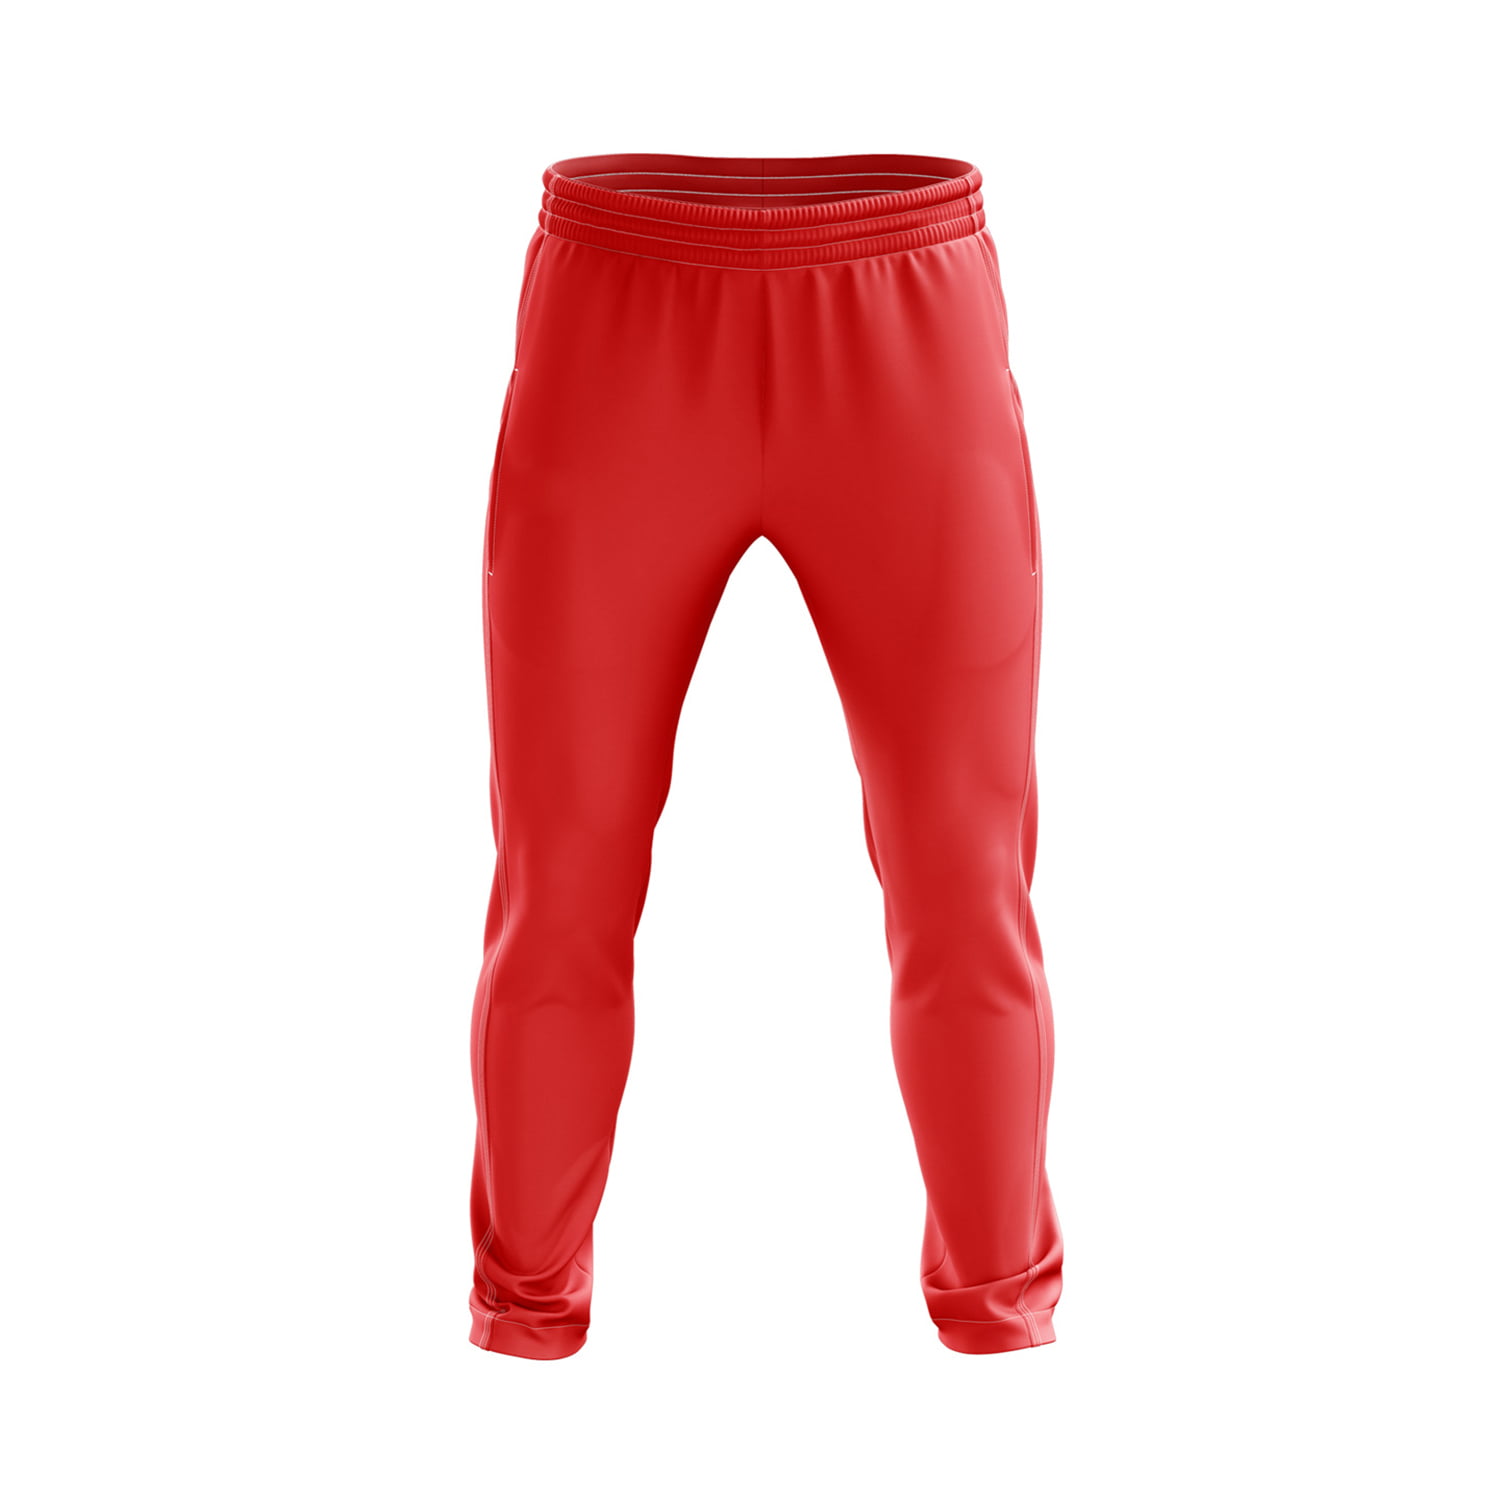 cricket trousers mens